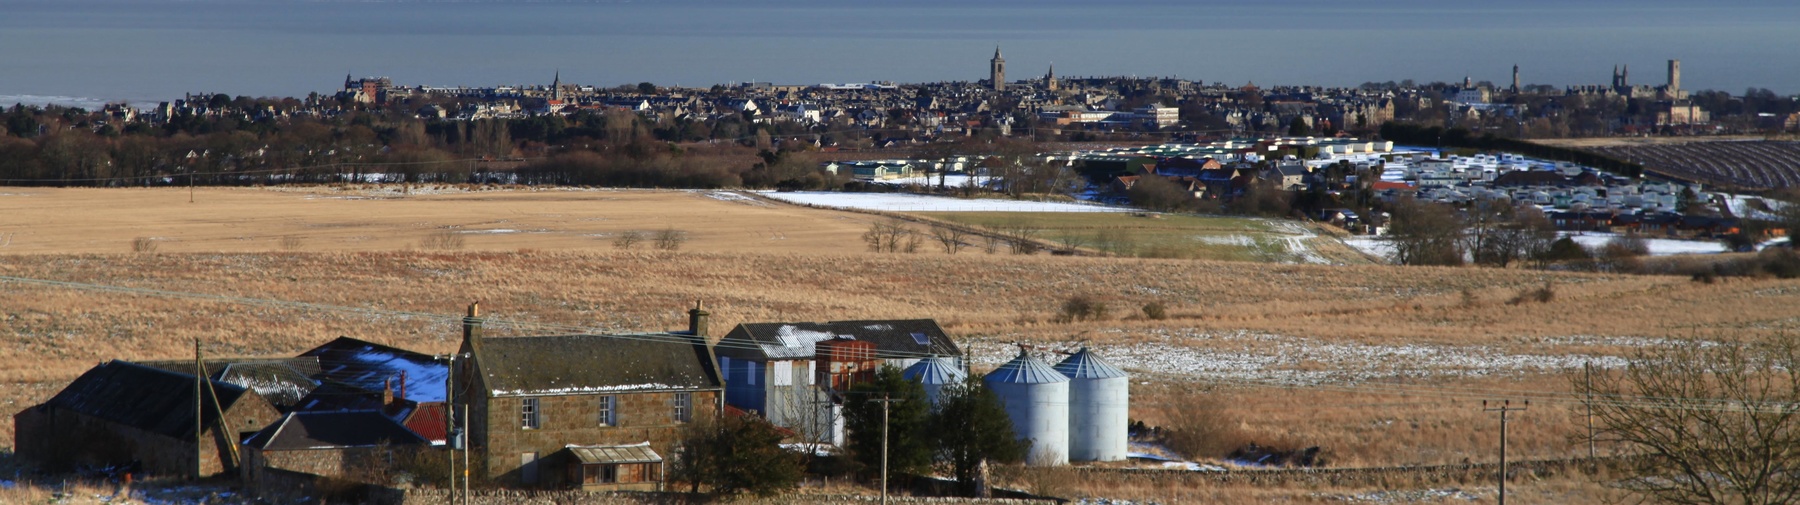 Feddinch HE TOWN IN THE FOREGROUND cropAND ANGUS COUNTY IN THE BACKGROUND